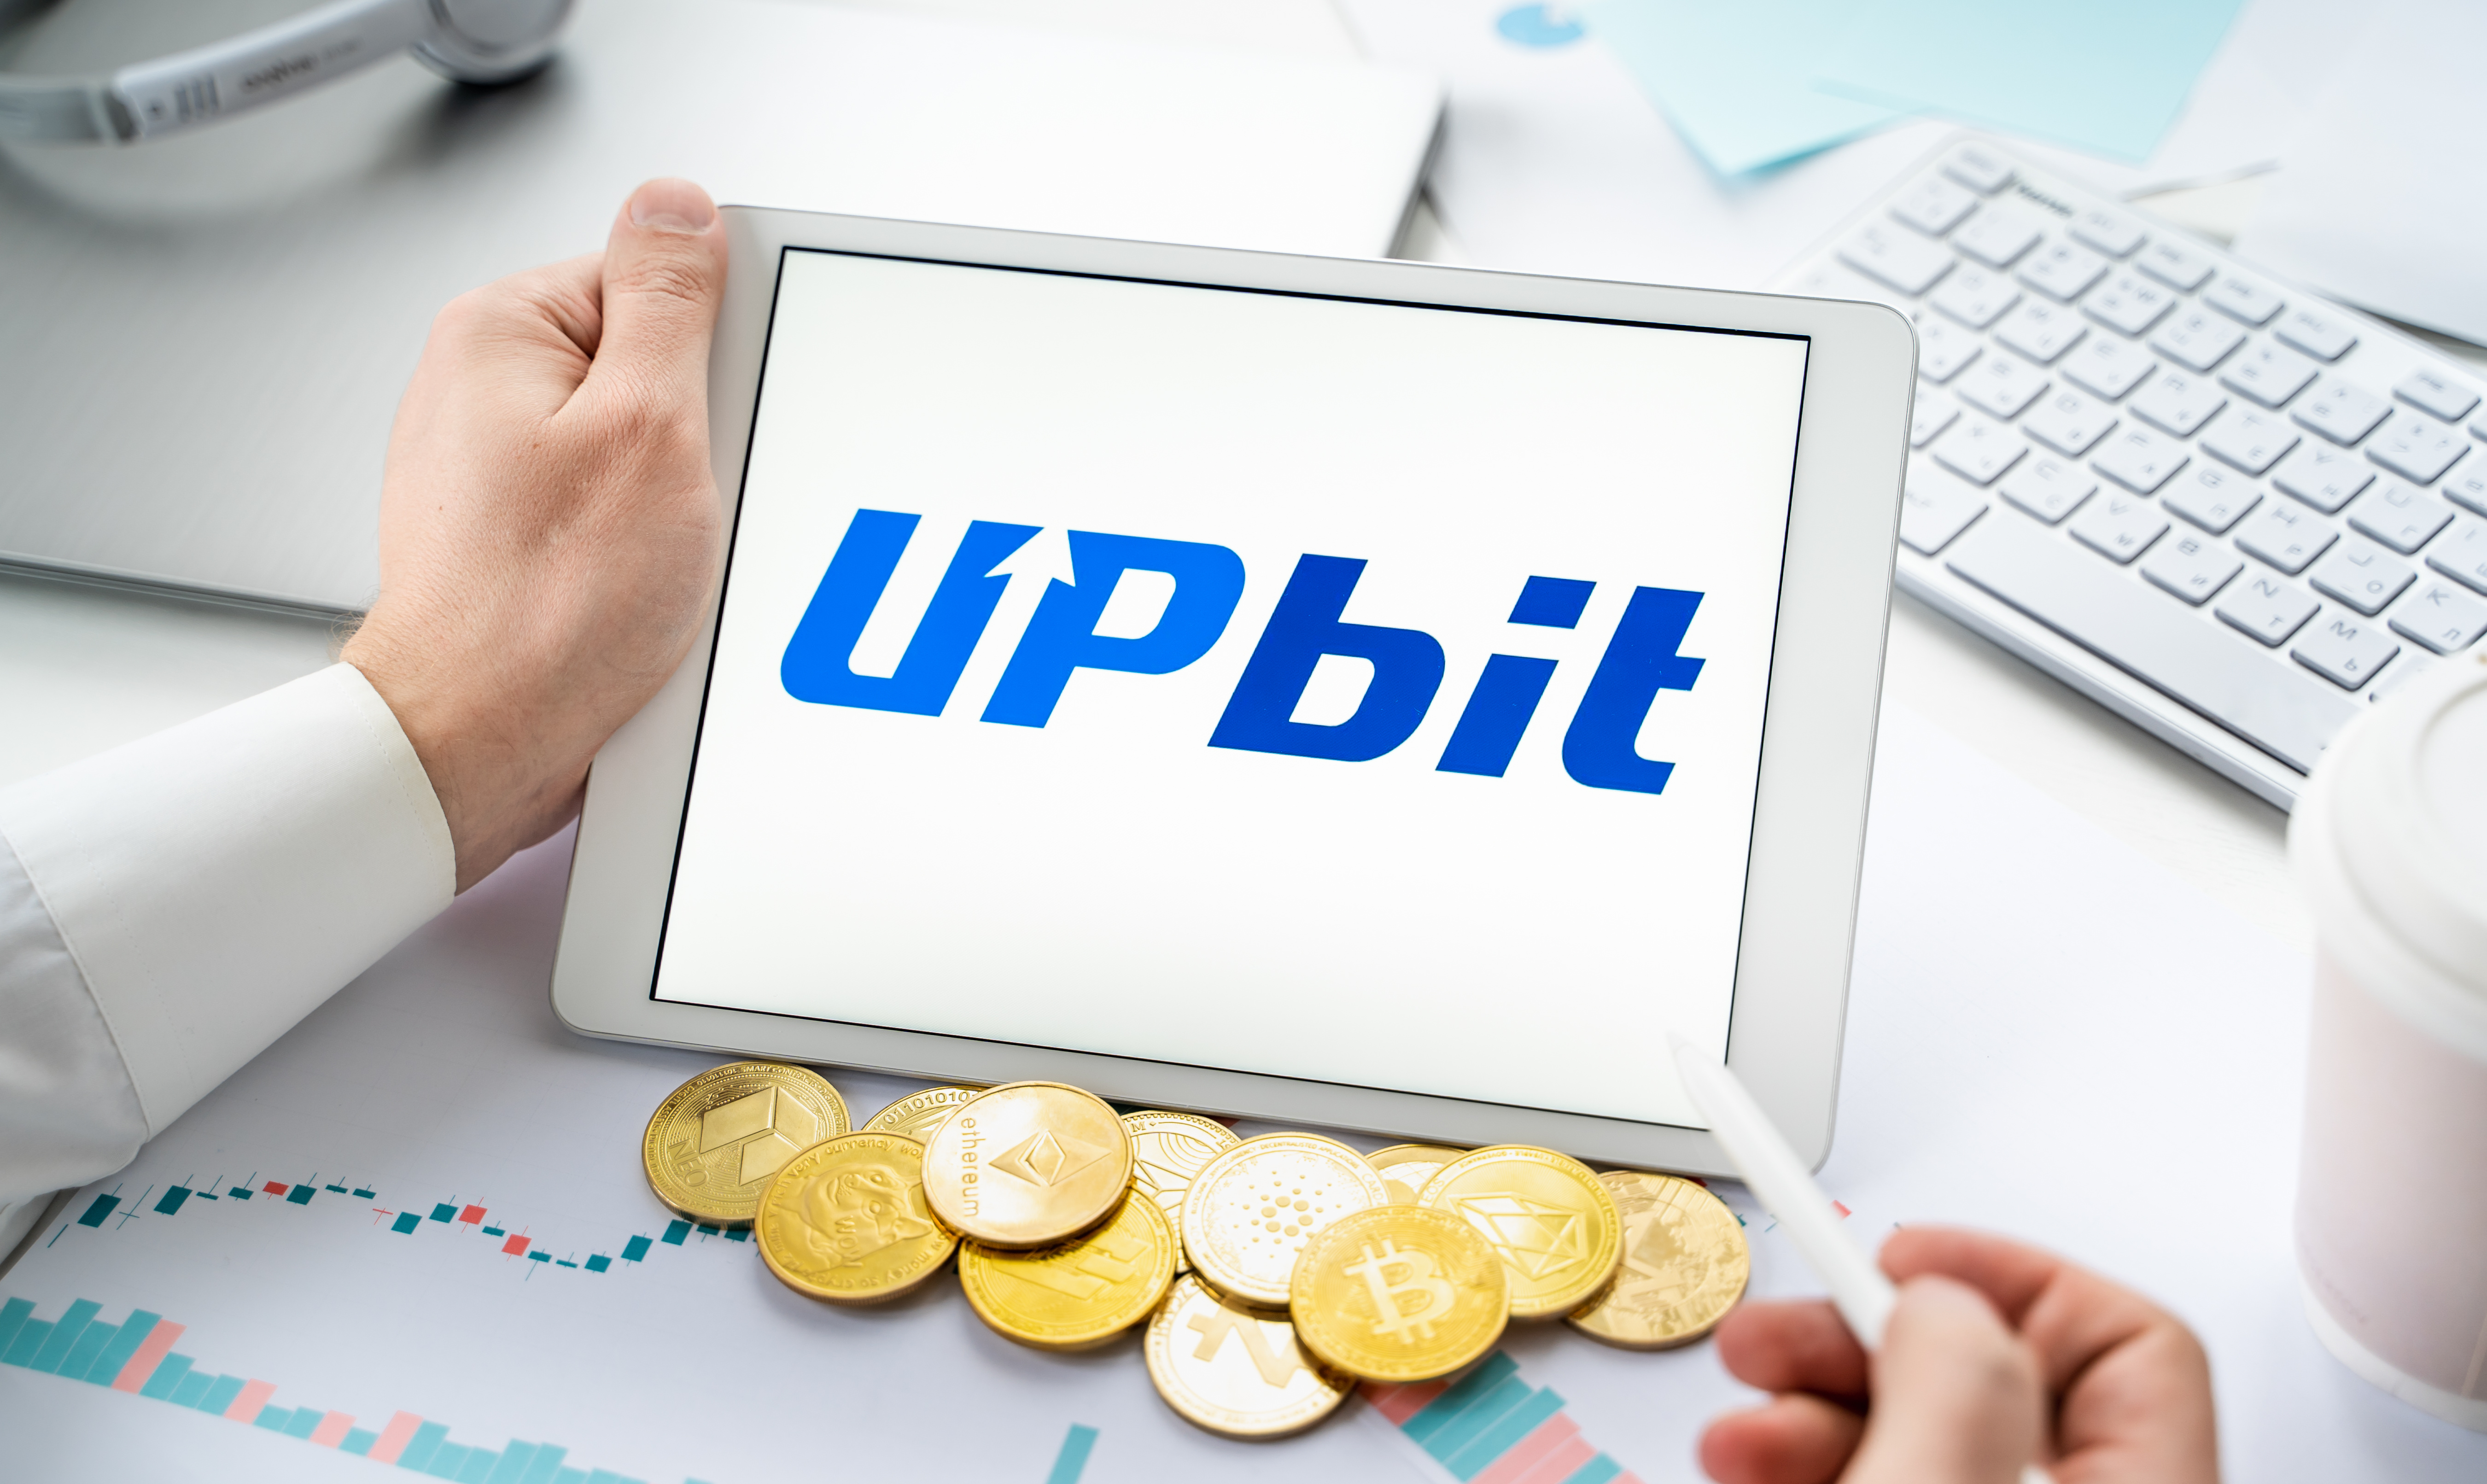 A tablet PC user looks holds a device with the Upbit logo on it. In front of the device is a pile of tokens symbolizing cryptoassets.